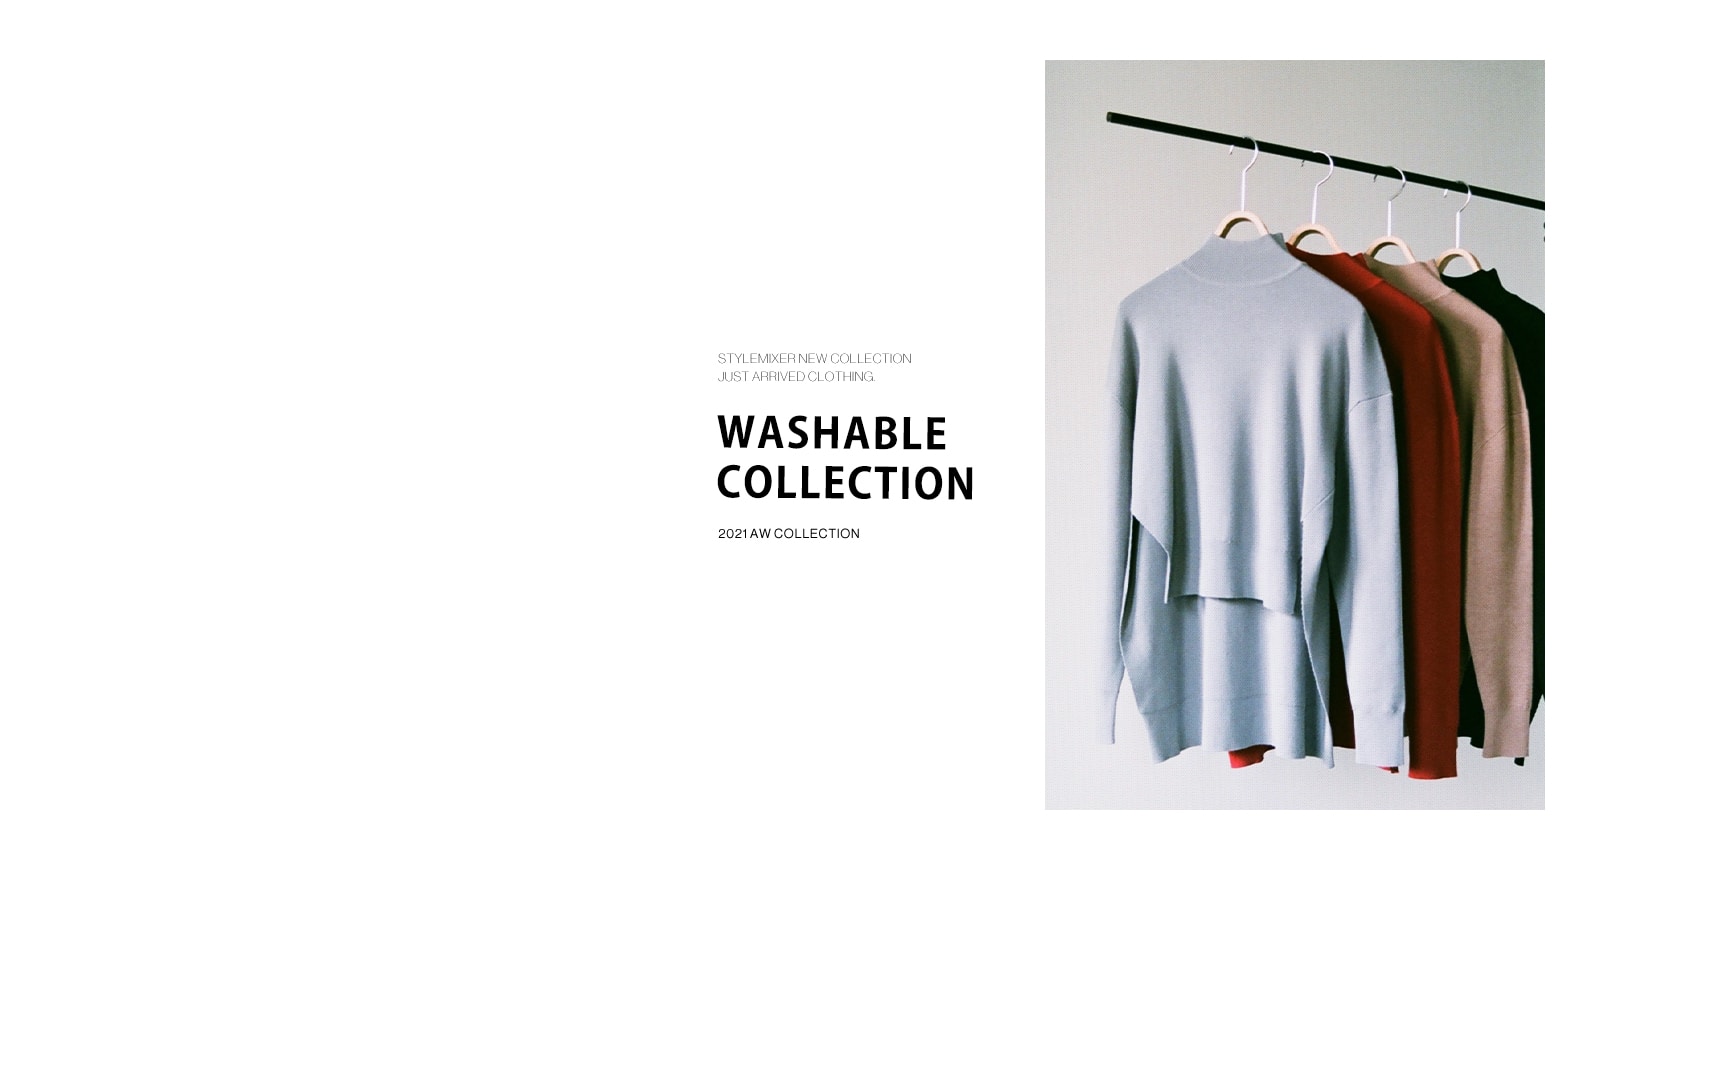 WASHABLE COLLECTION